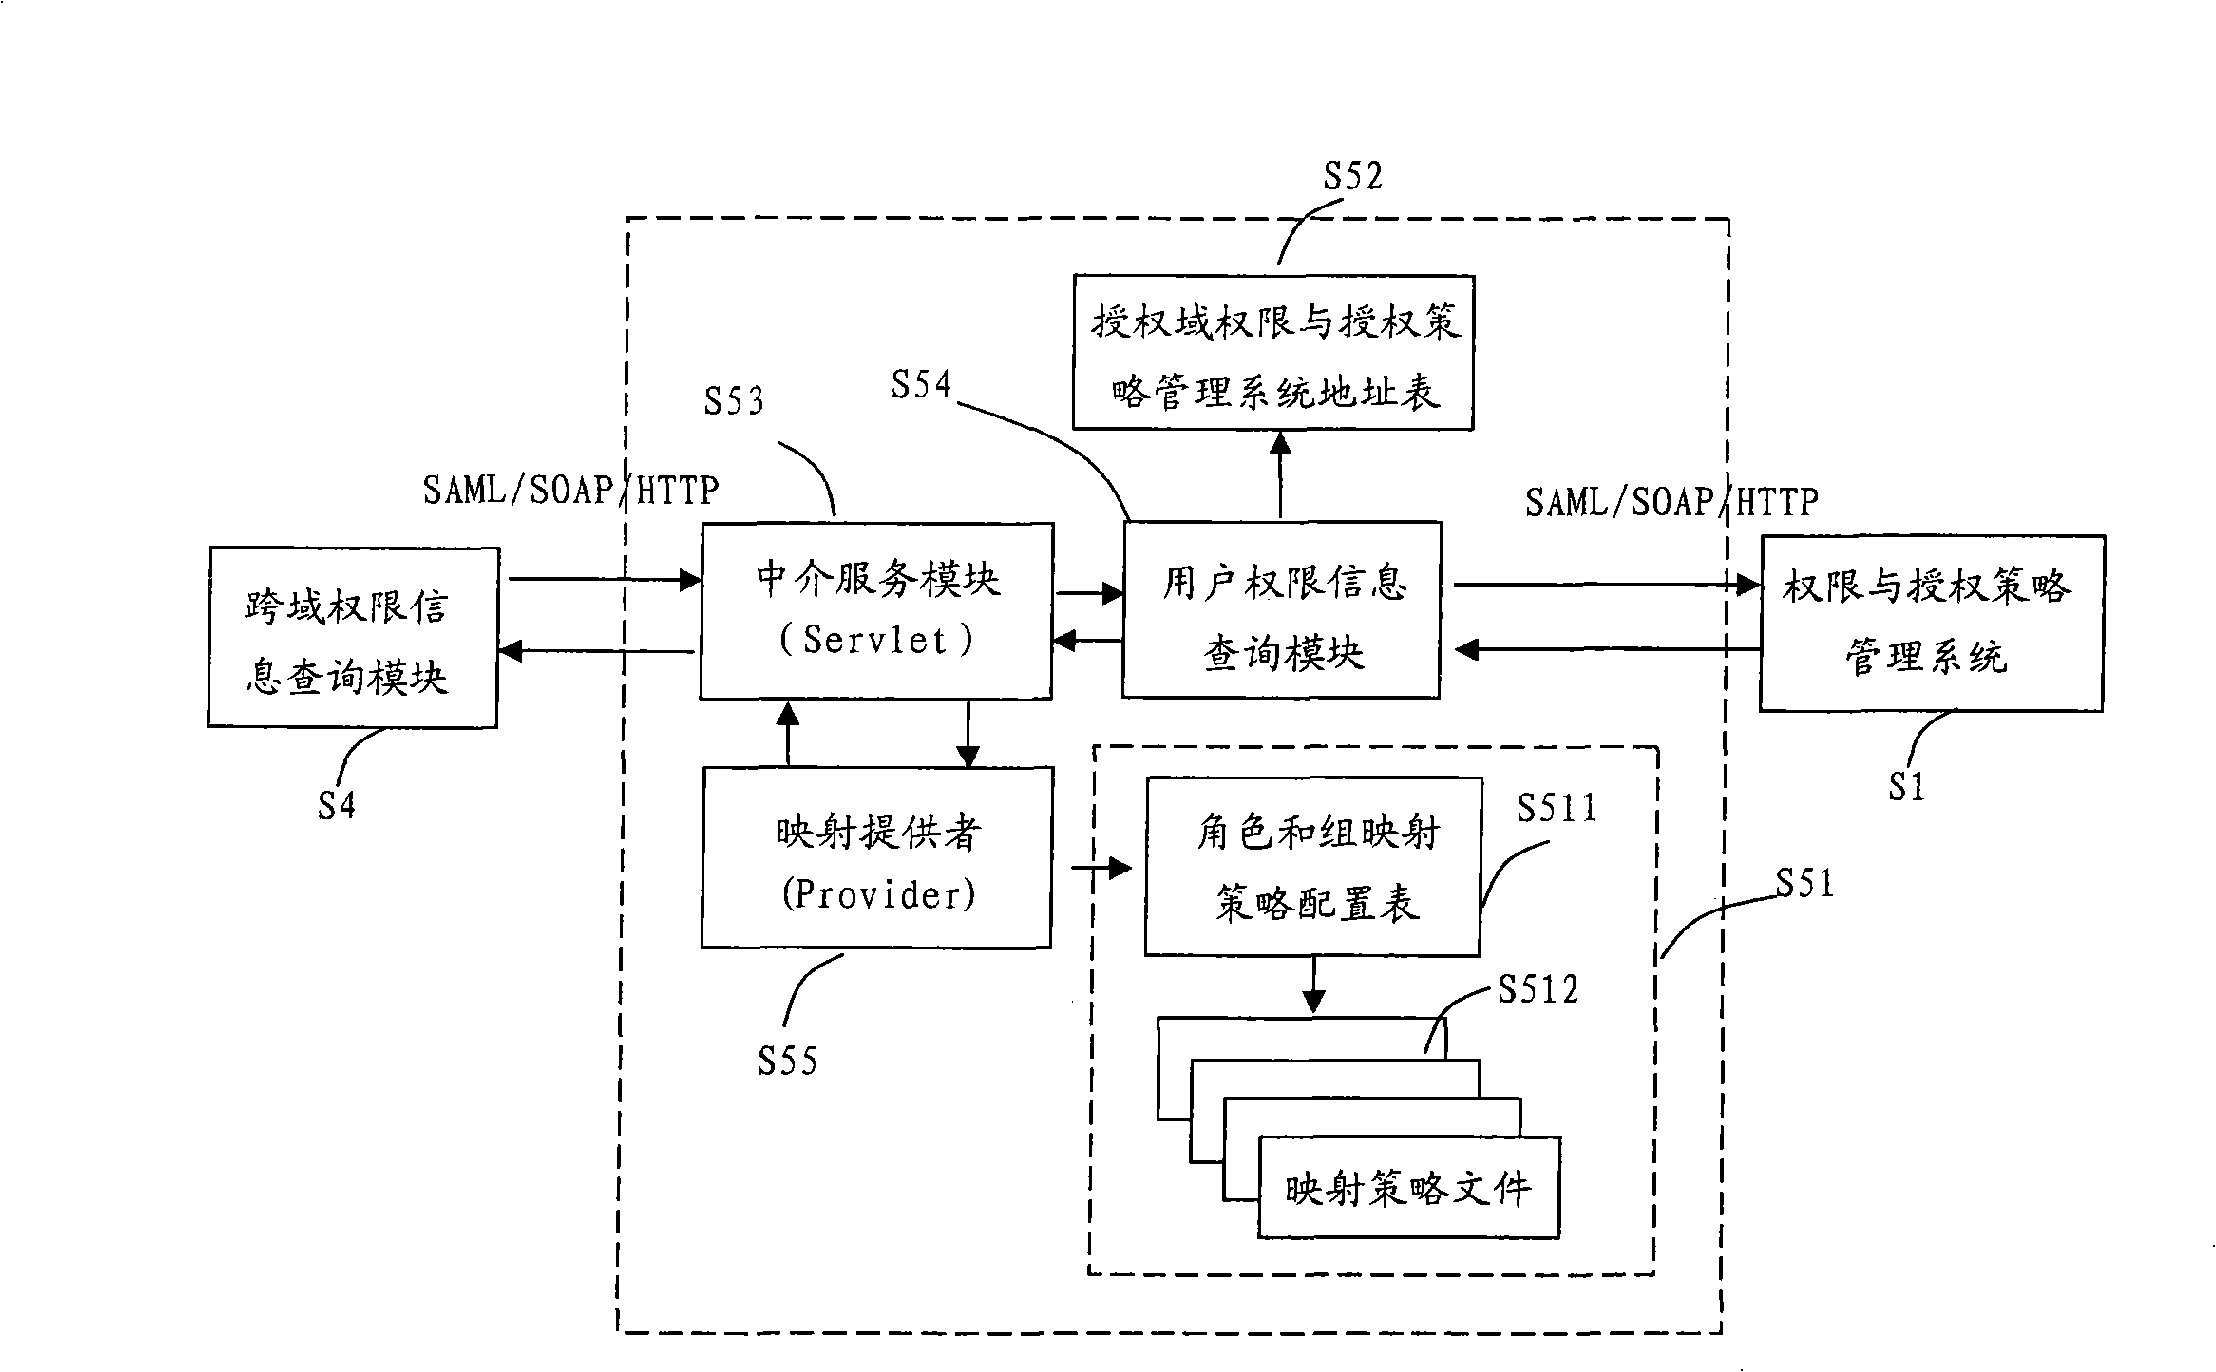 A cross-domain access control system for realizing role and group mapping based on cross-domain authorization